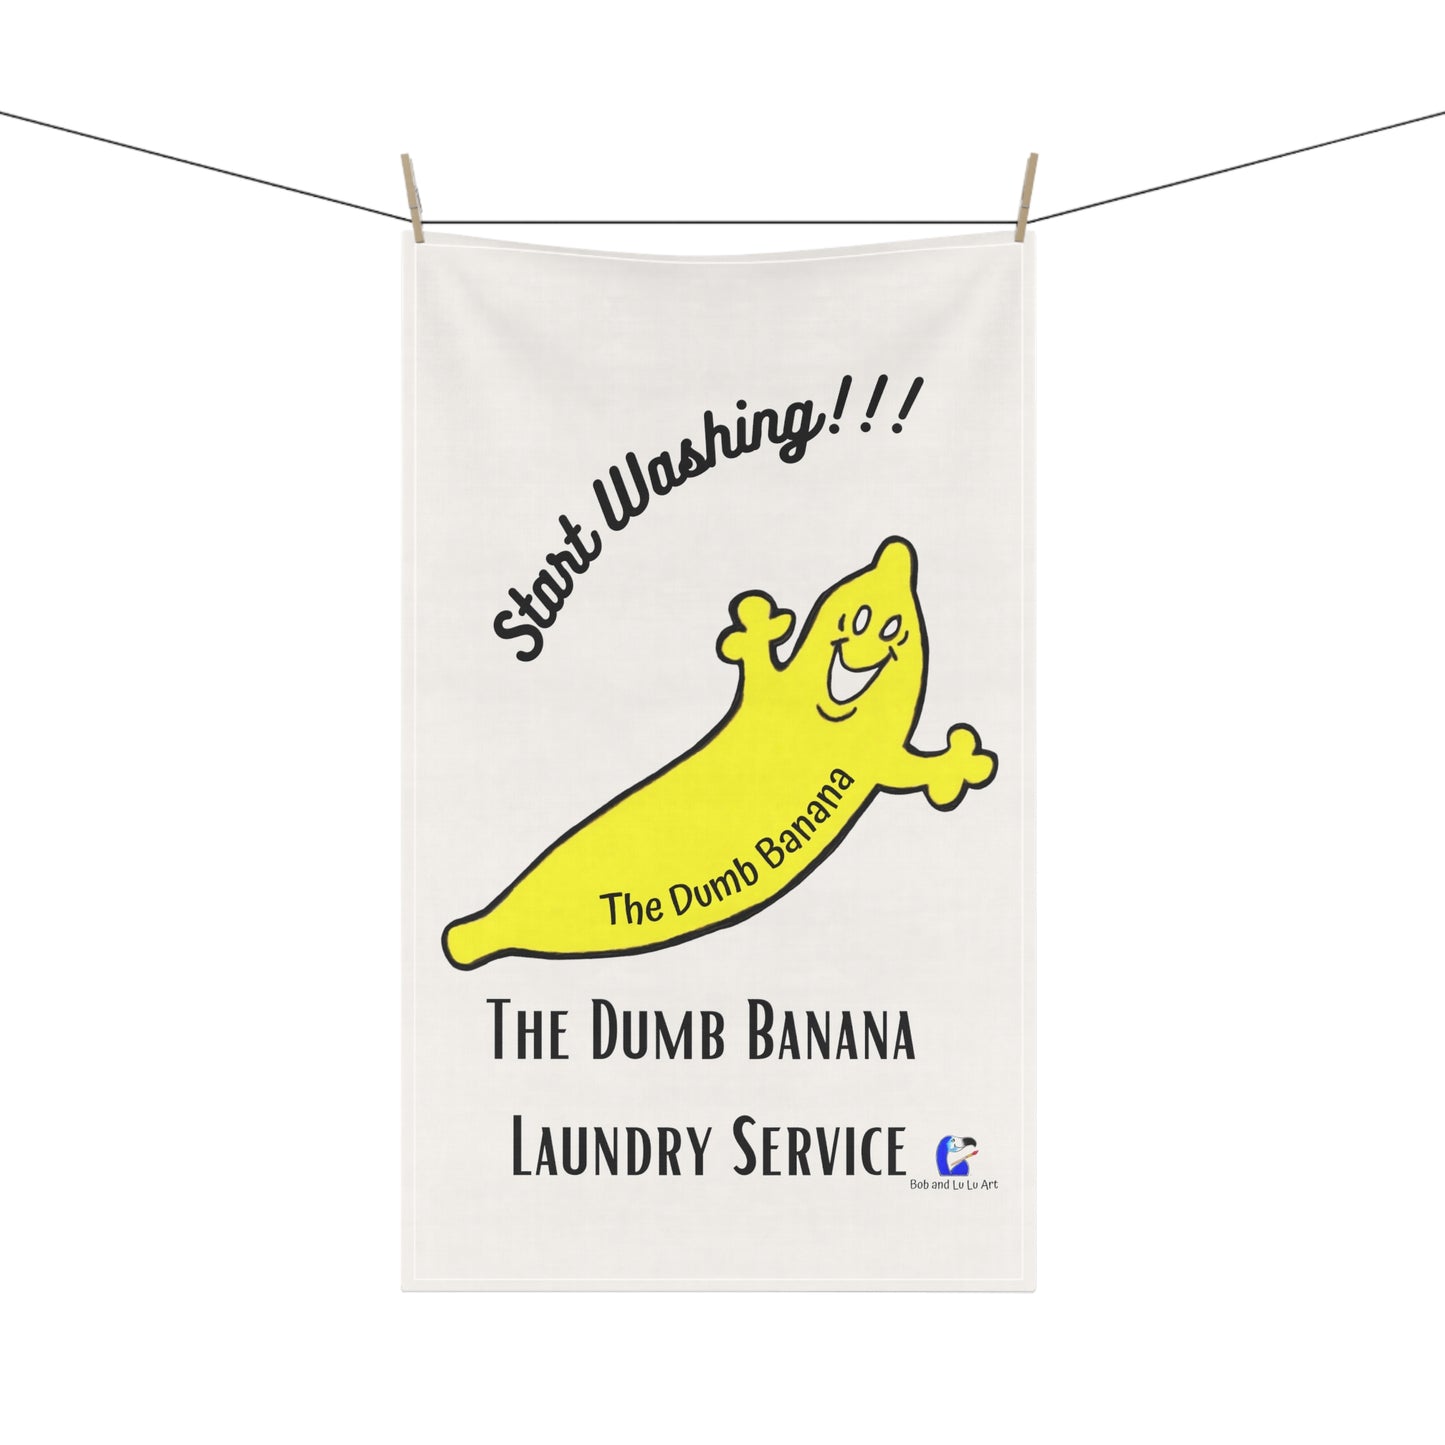 The Dumb Banana "START WASHING!!!" Cotton Twill Laundry & Kitchen Towel - It's so amazing that you will never use banana peels again!!!